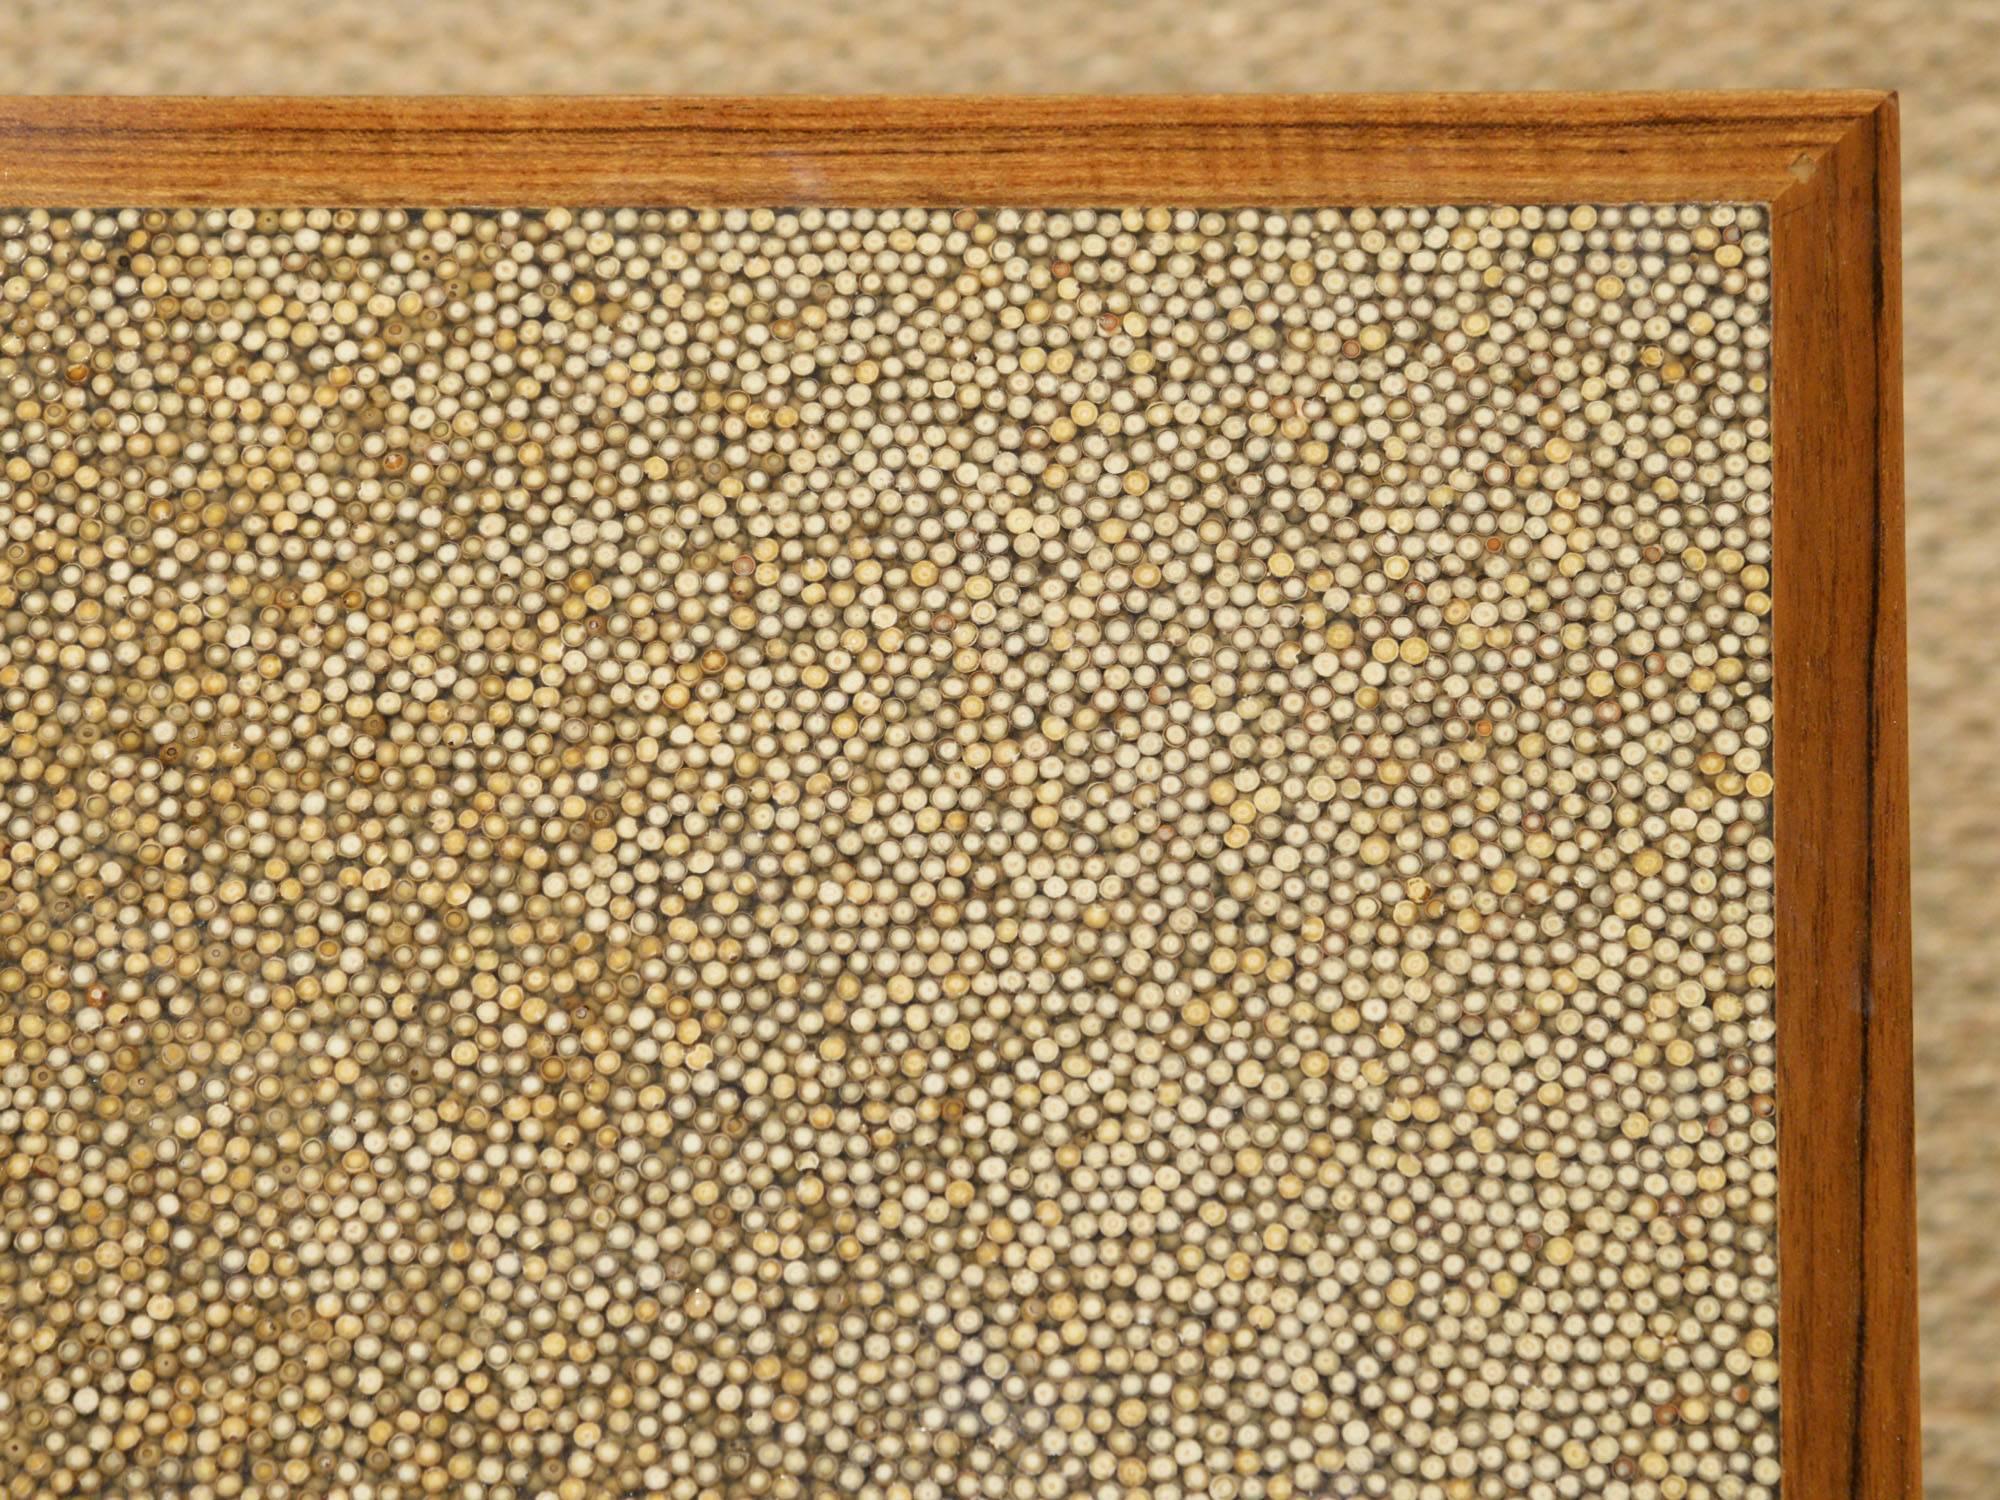 Late 20th Century Ado Chale, Coffee Table with Peppercorn Inclusion into Resin, 1970s